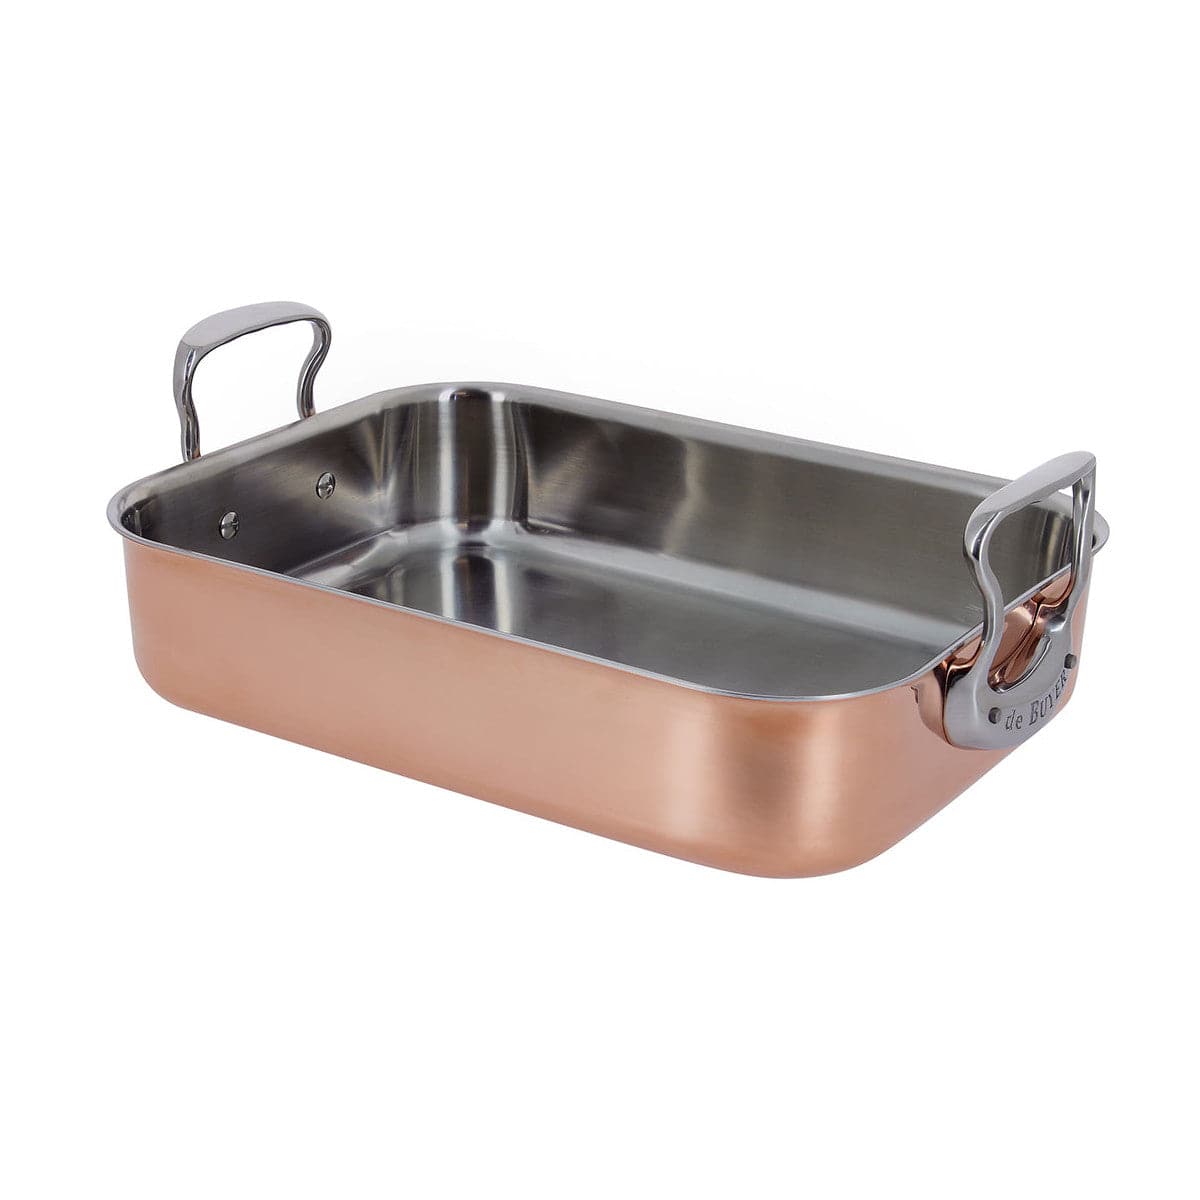 de Buyer Inocuivre Copper Roasting Pan With Two Stainless Steel Handles, 13.75 x 9.8-Inches - Kitchen Universe